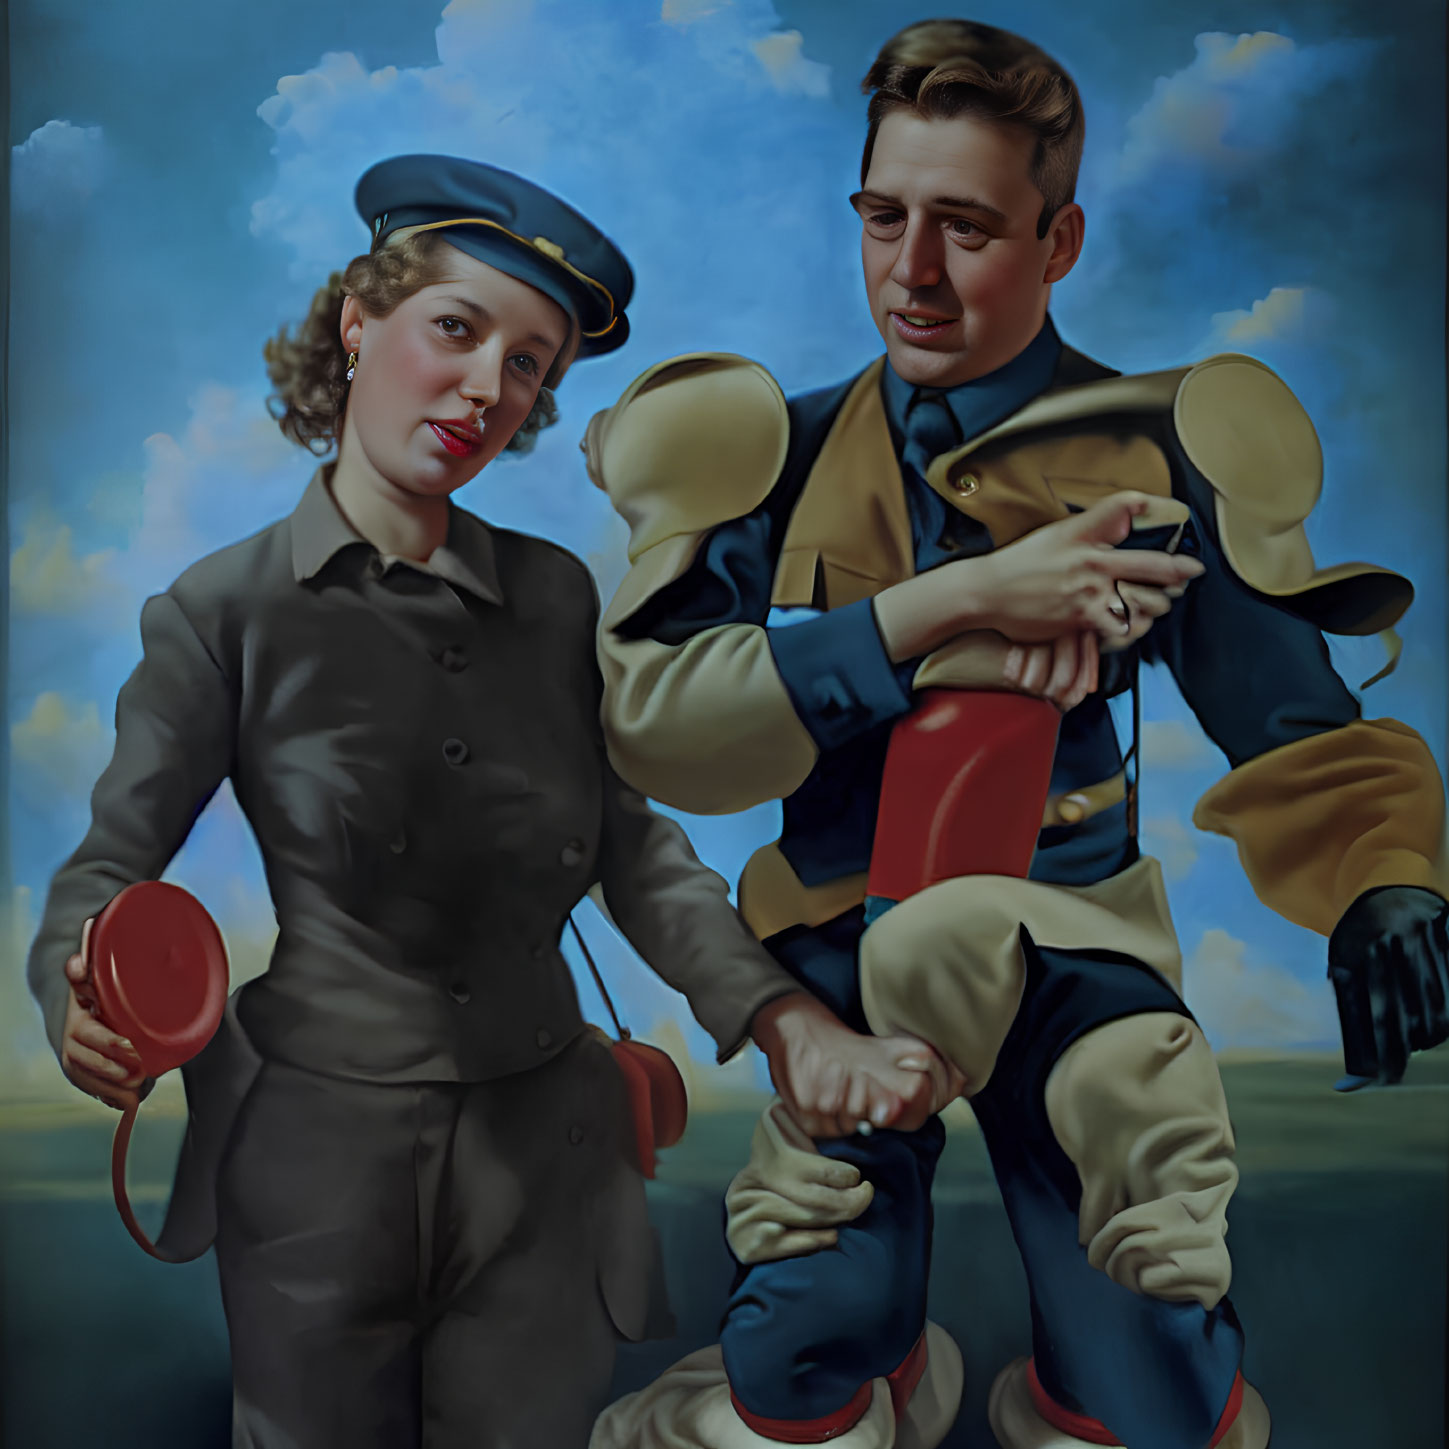 Man in colorful outfit on red mechanical horse with woman in gray uniform and cap, both calm.